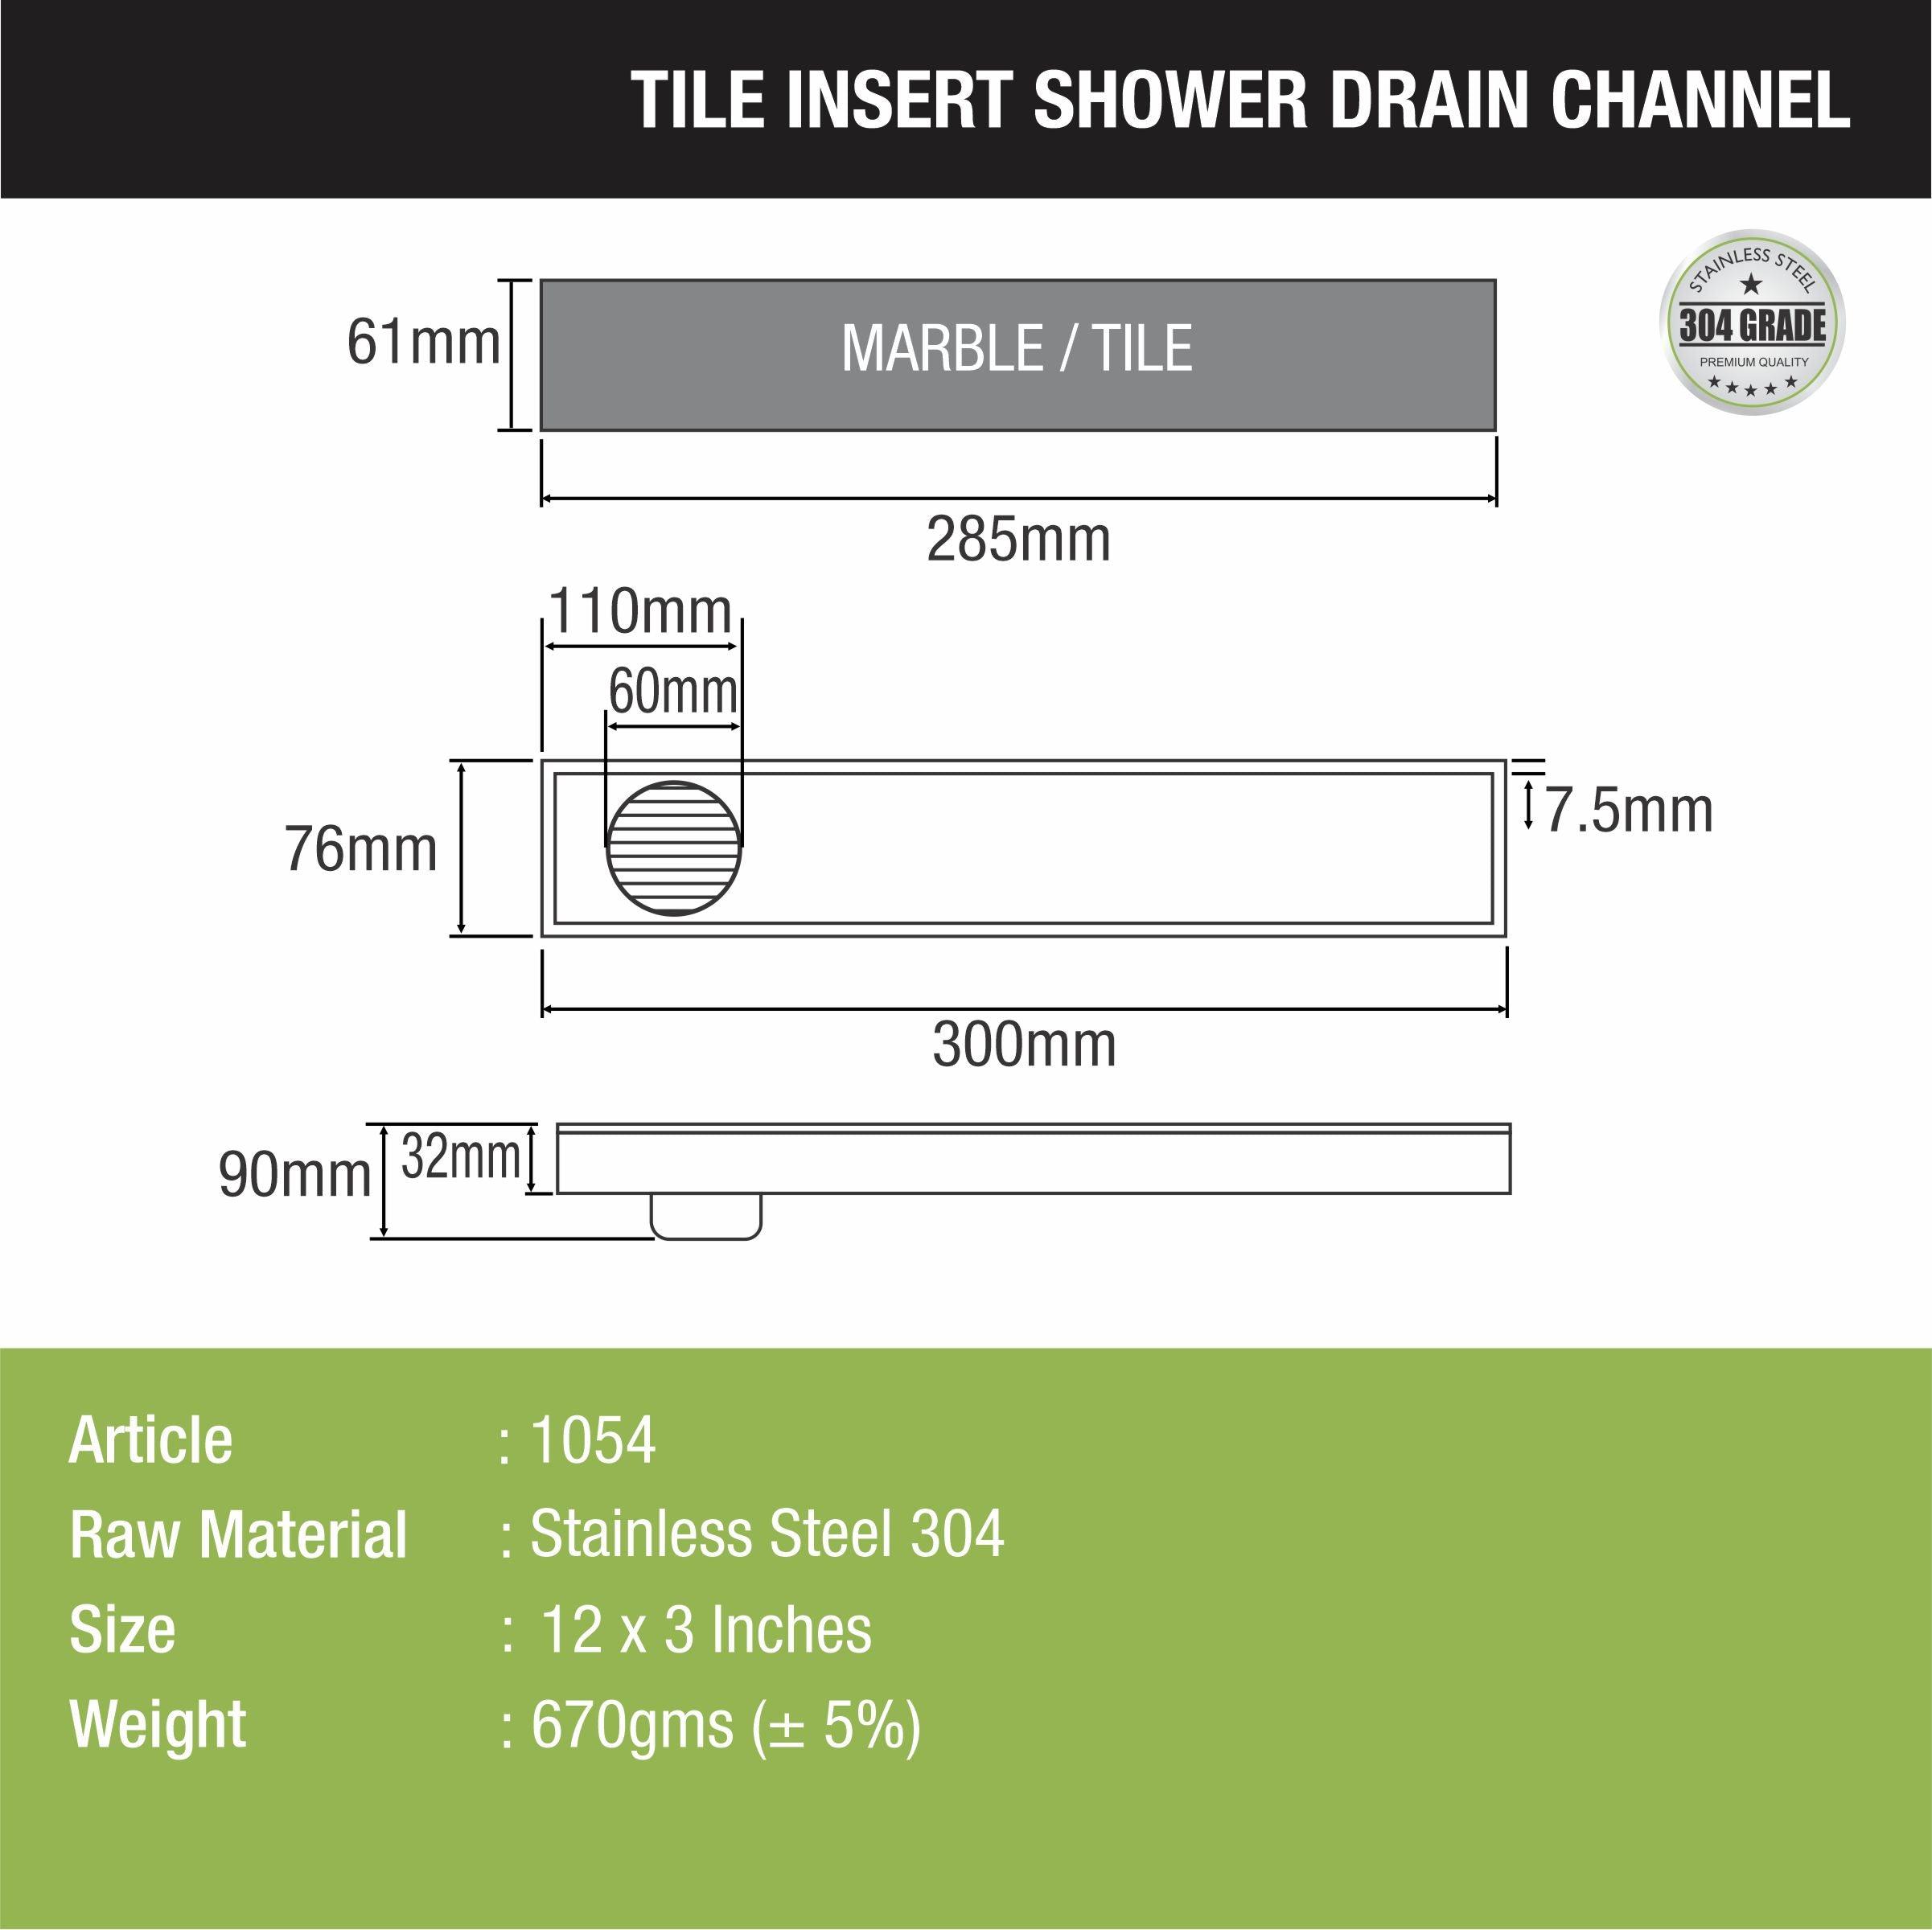 Tile Insert Shower Drain Channel (12 x 3 Inches) sizes and dimensions